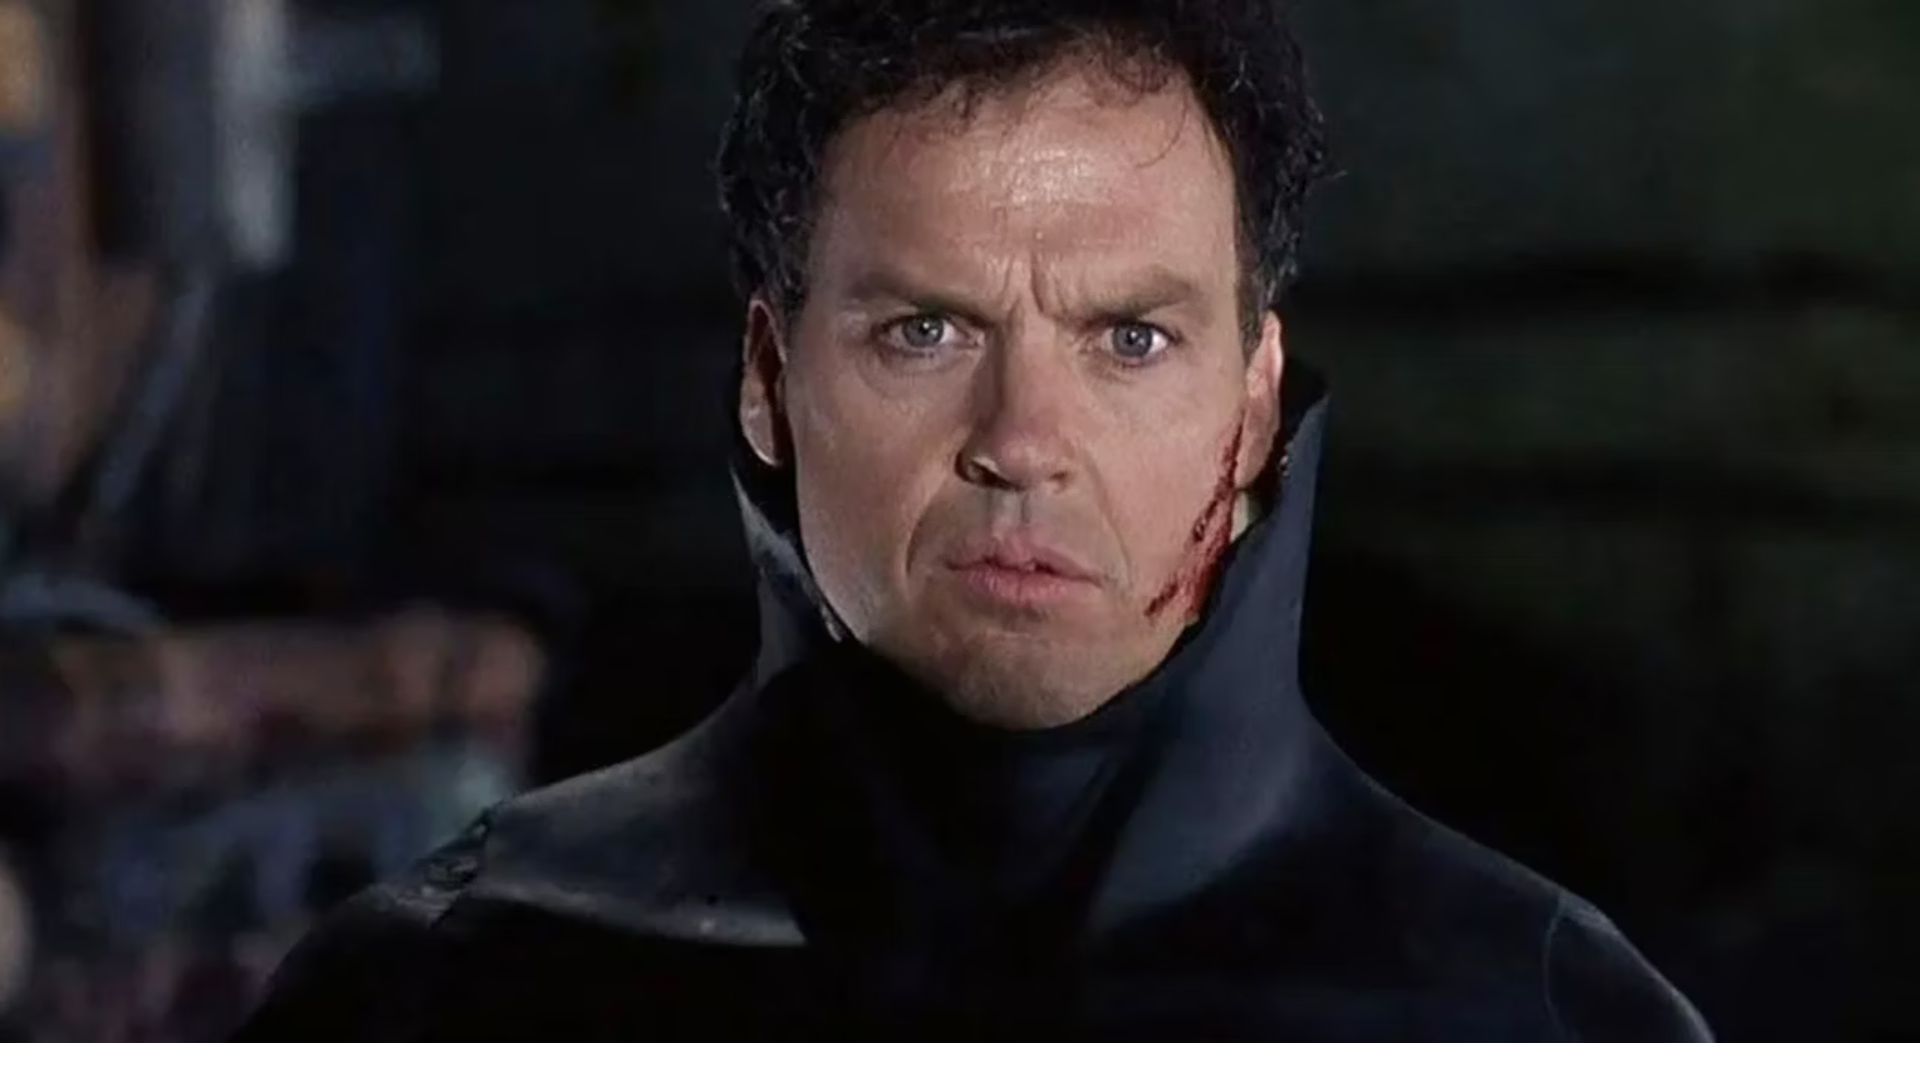 Michael Keaton - Known For His Roles In Comedic And Dramatic Films